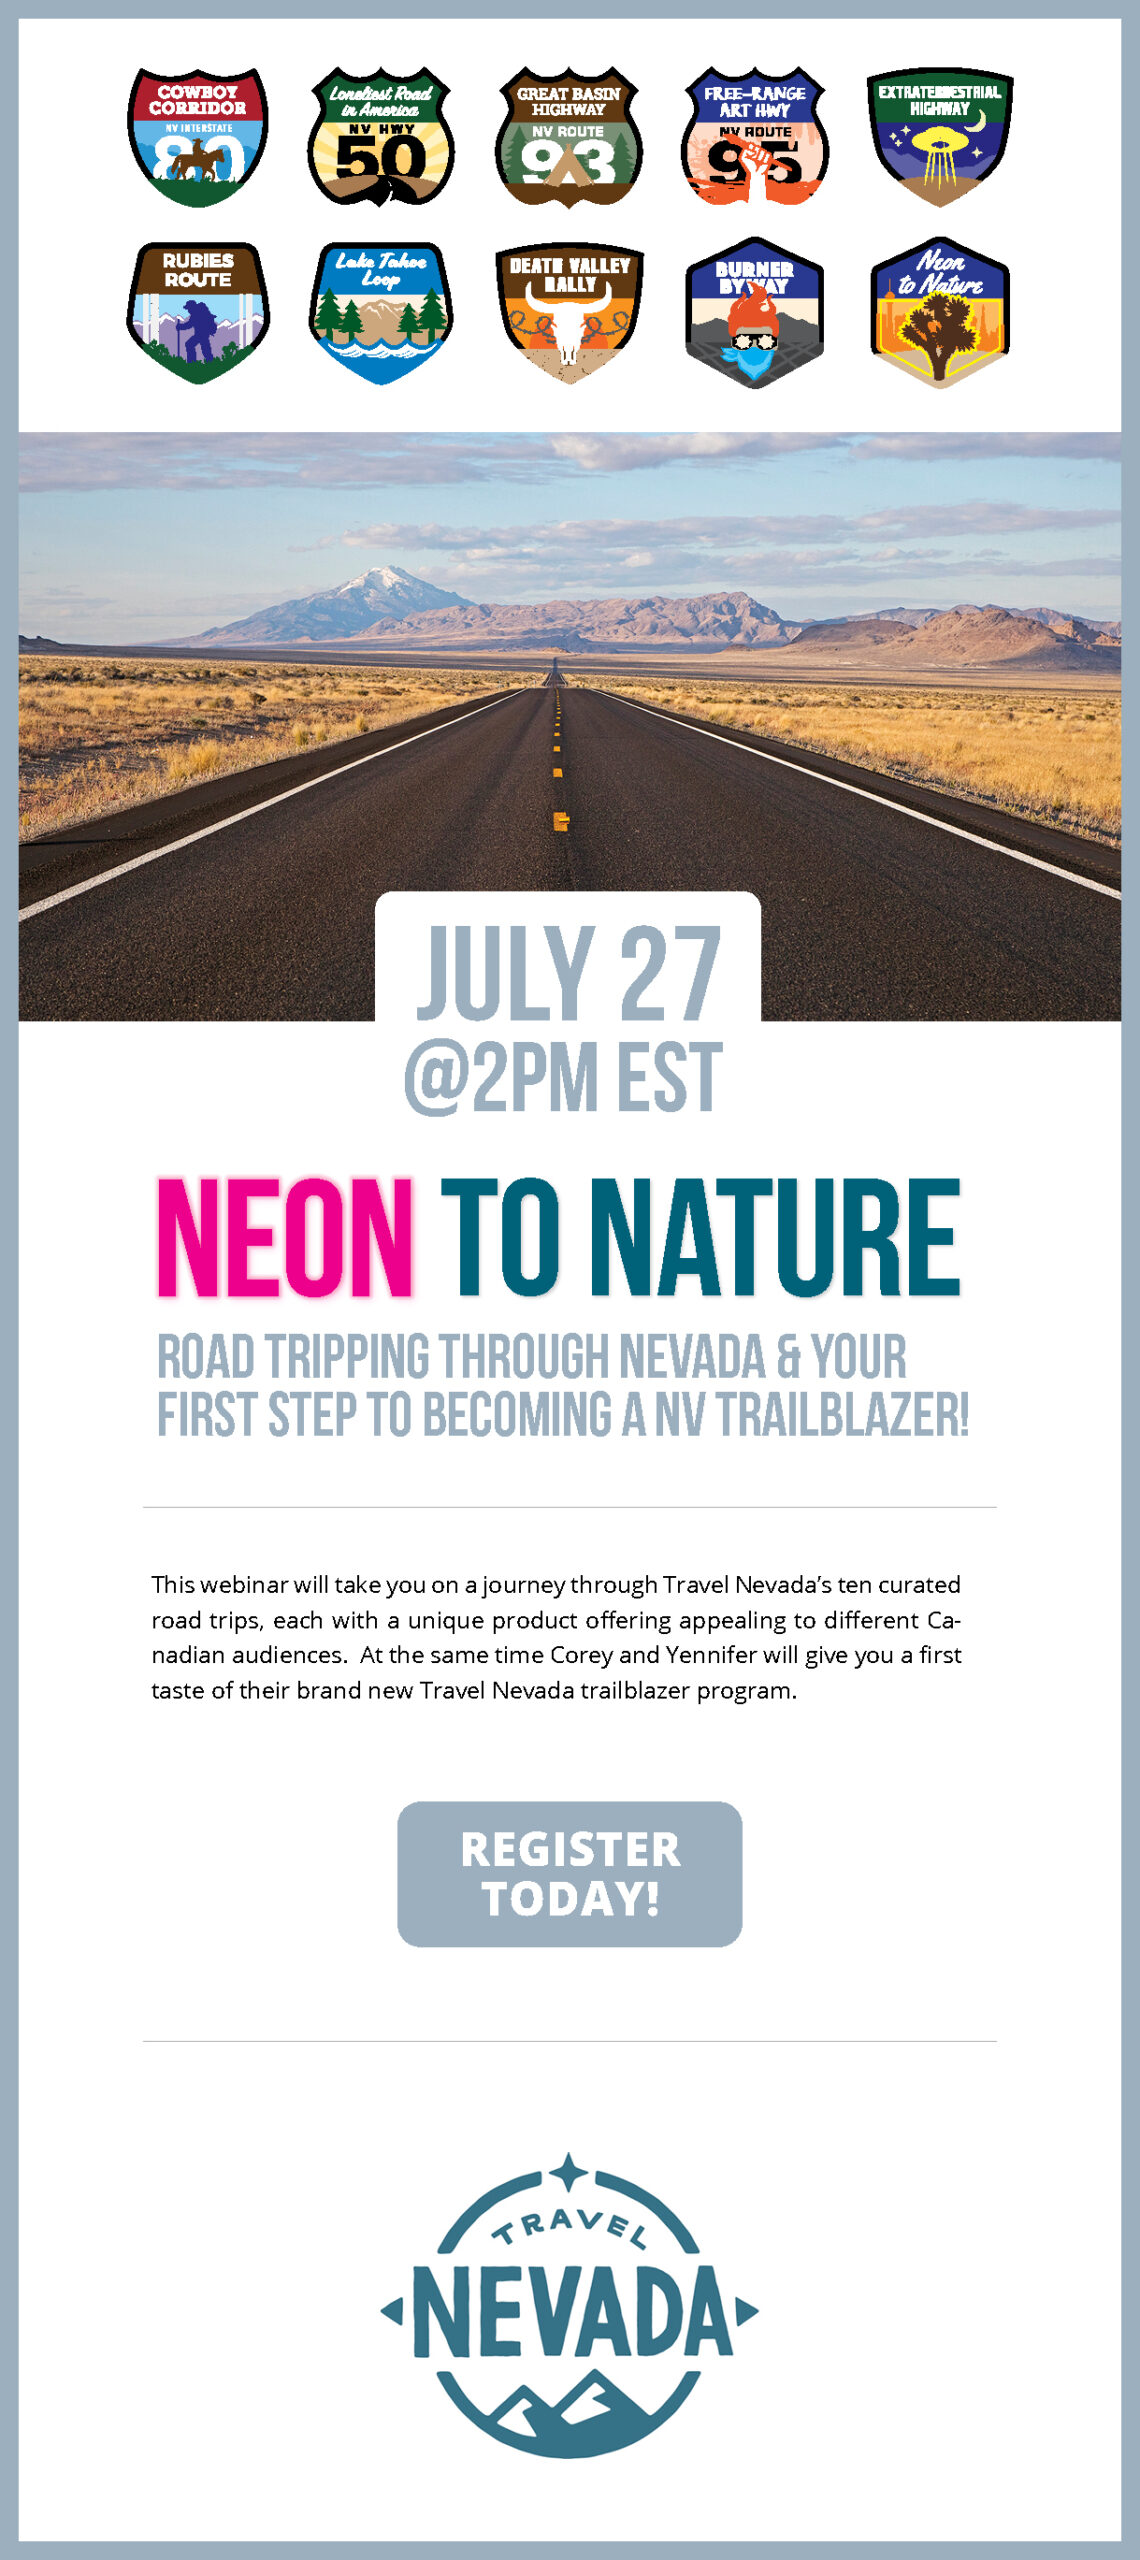 Road tripping through Nevada & your first step to becoming a NV Trailblazer!